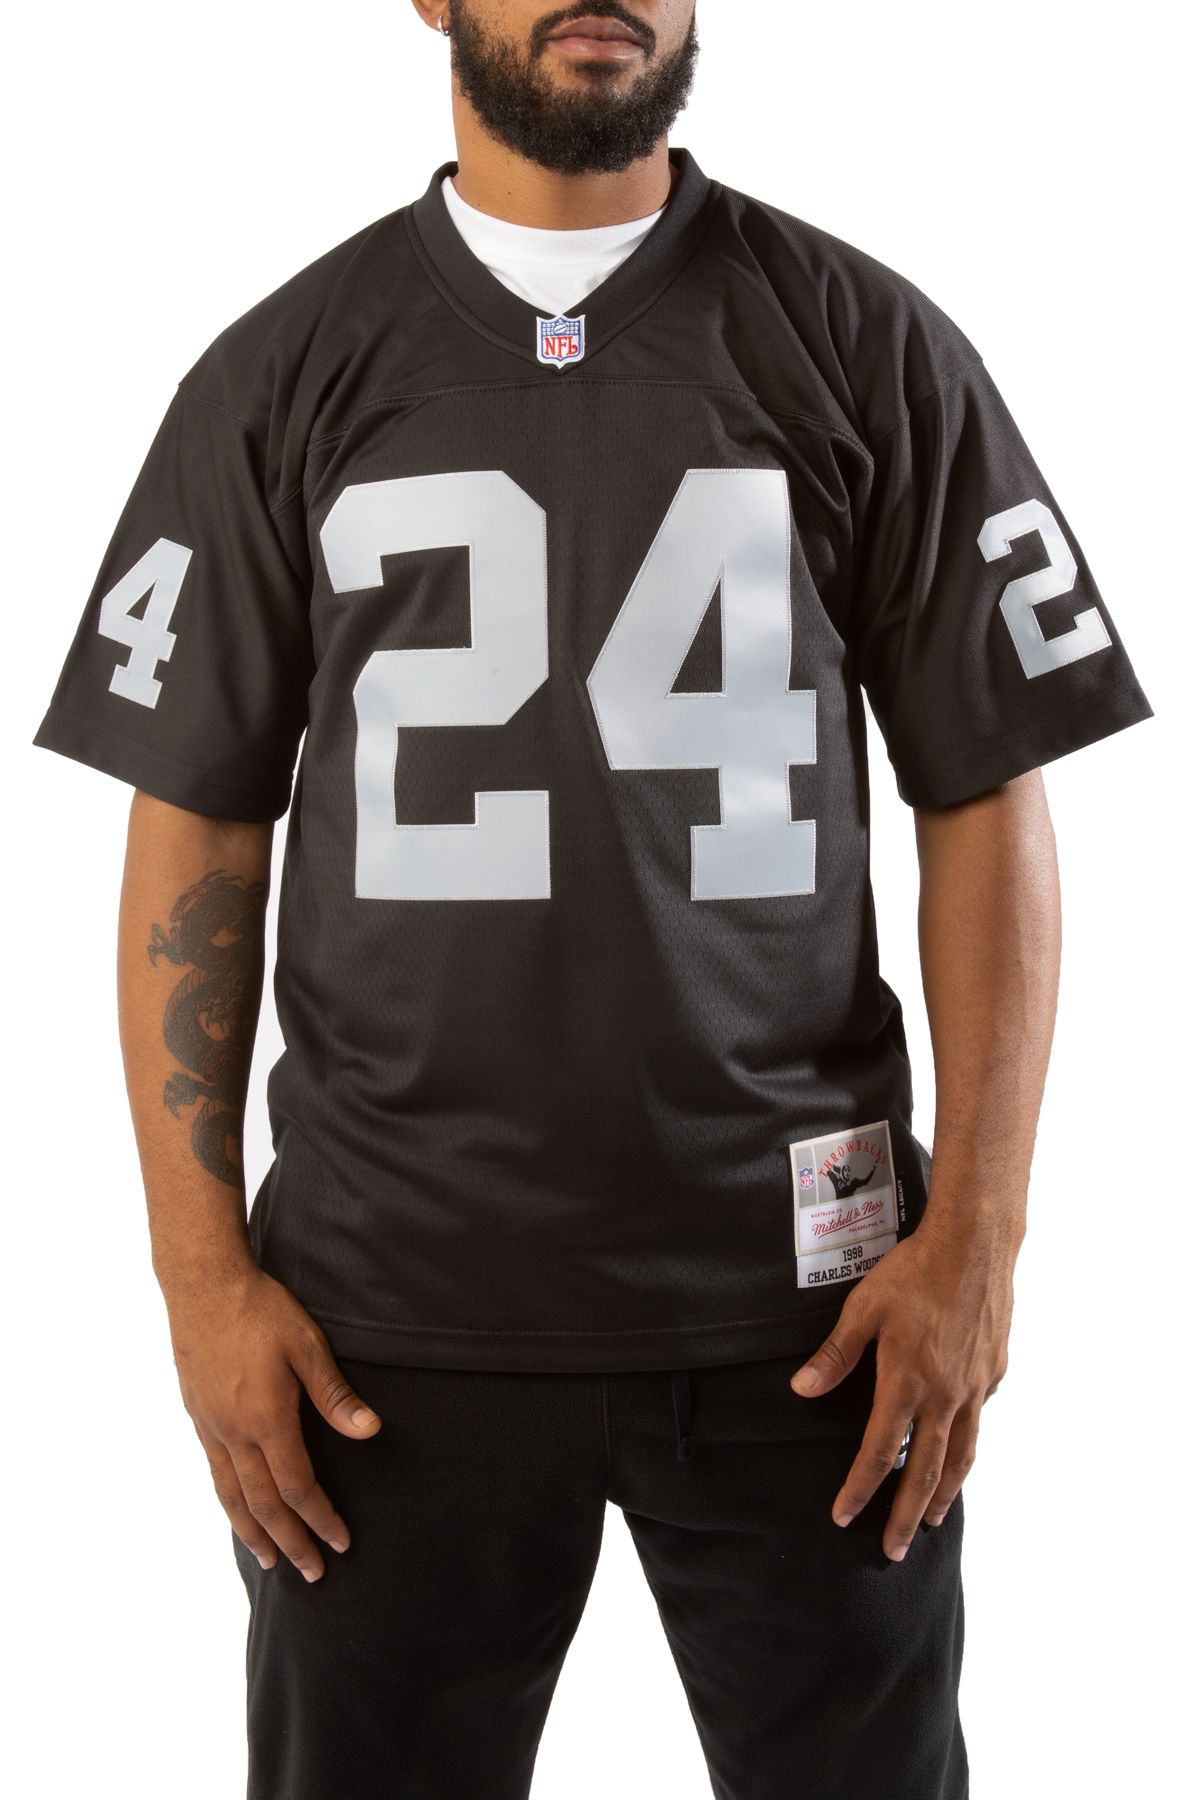 charles woodson jersey number